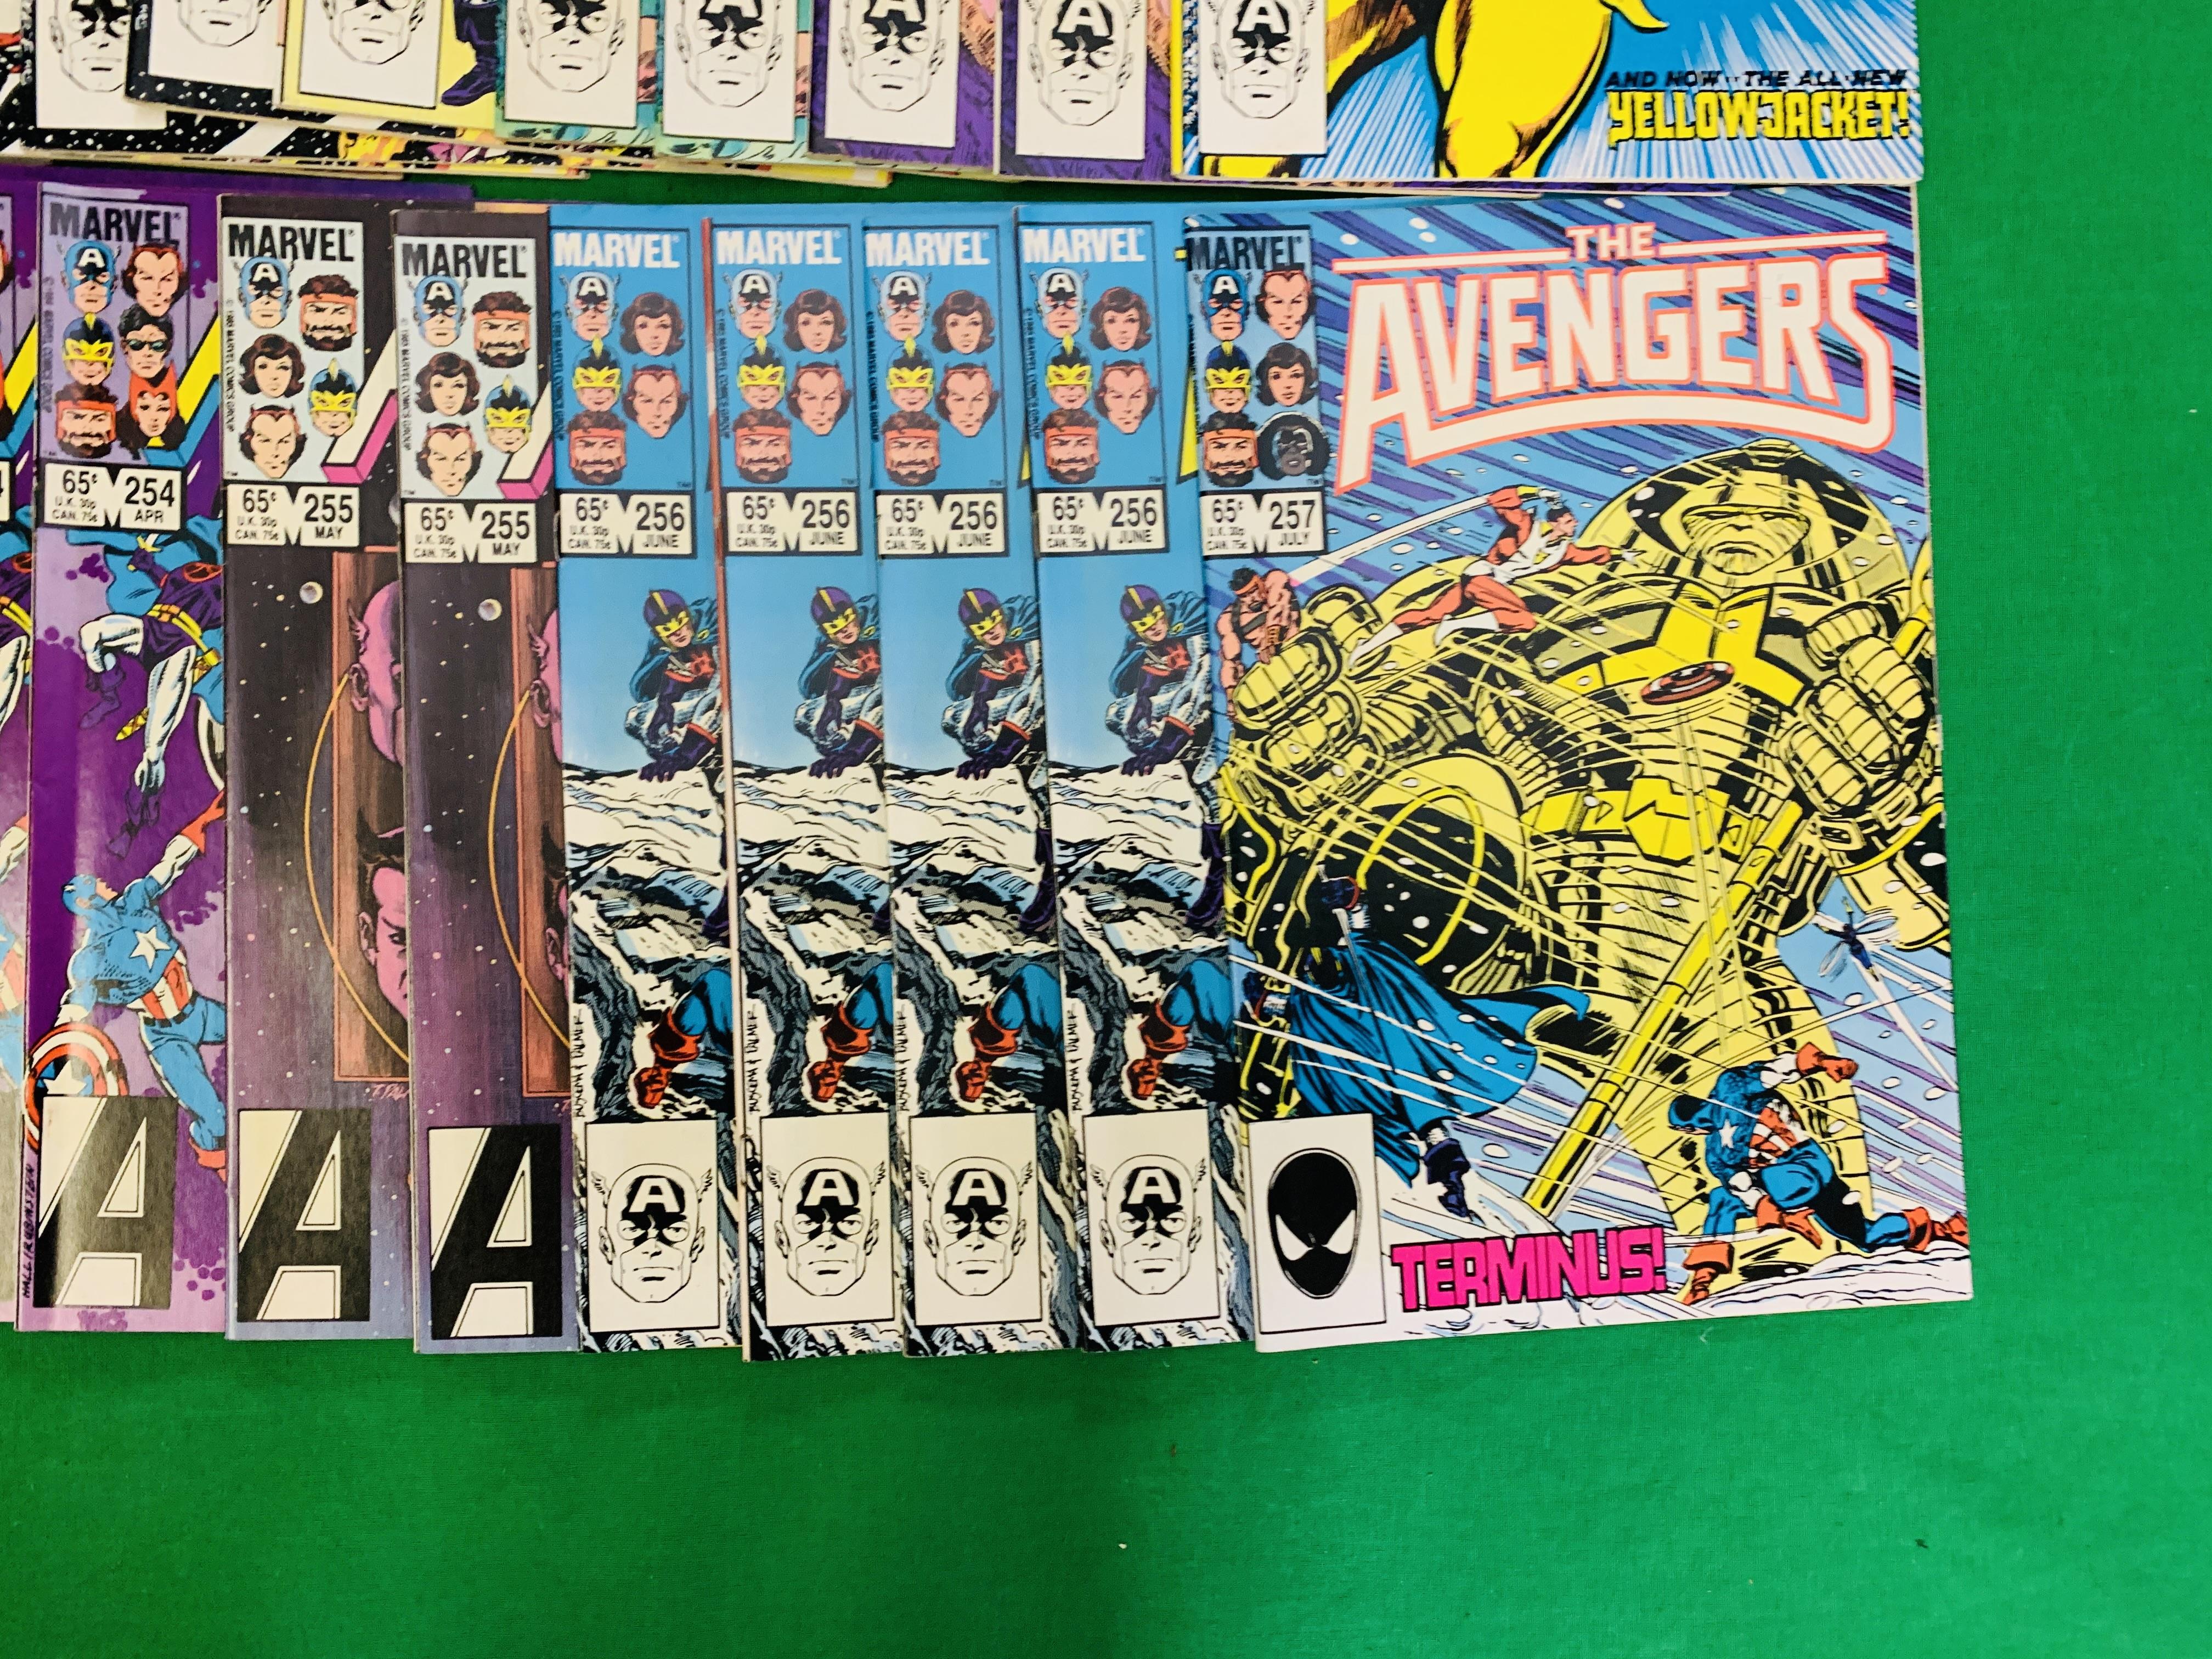 MARVEL COMICS THE AVENGERS NO. 101 - 299, MISSING ISSUES 103 AND 110. - Image 112 of 130